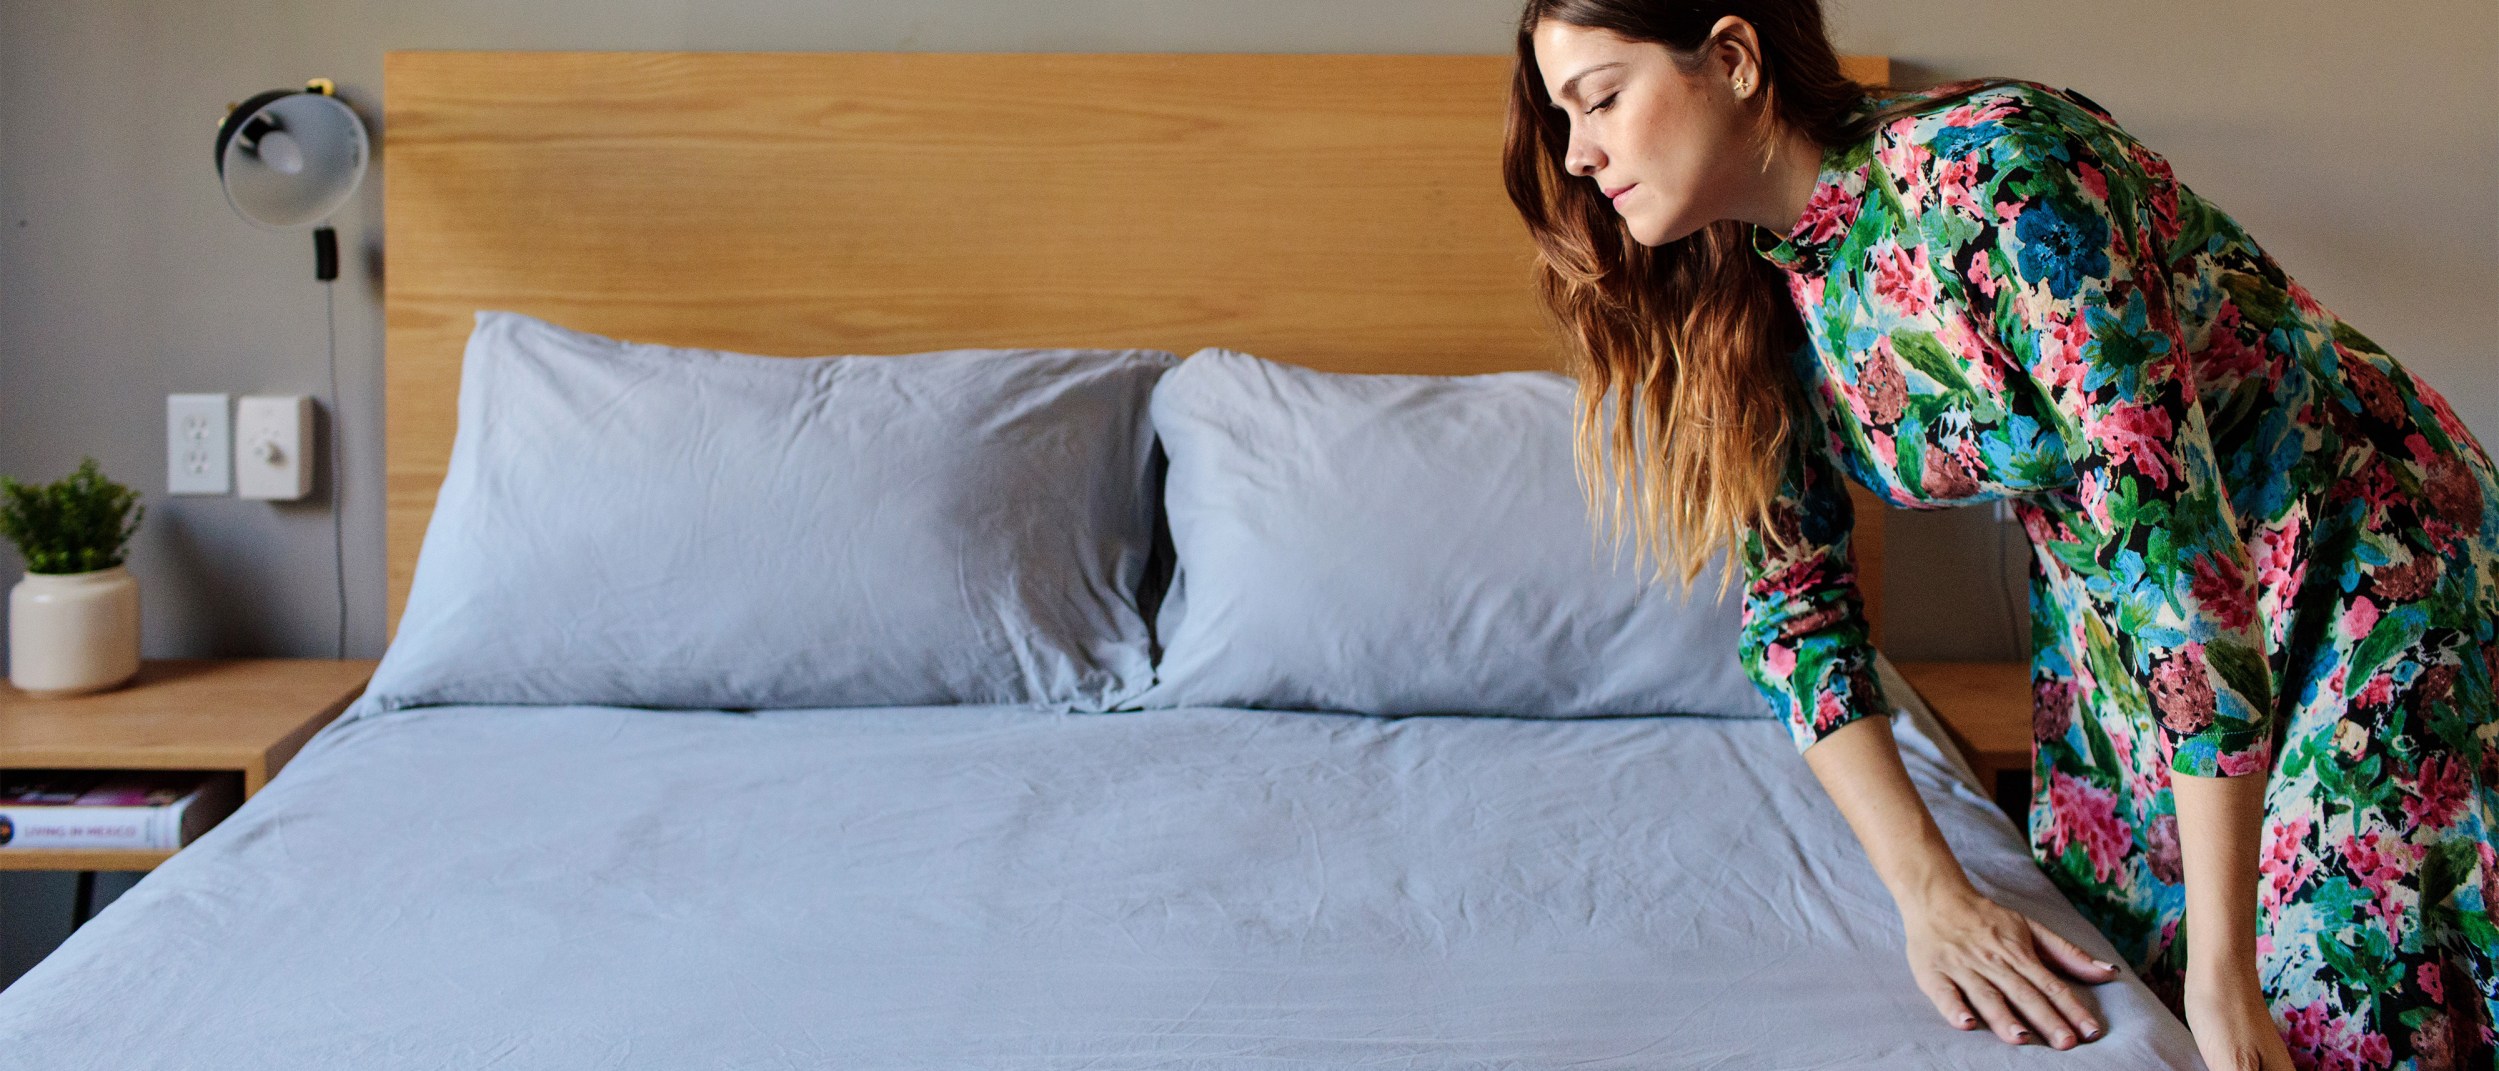 A host smoothes out creases on the sheets of a bed for her upcoming Airbnb guests.